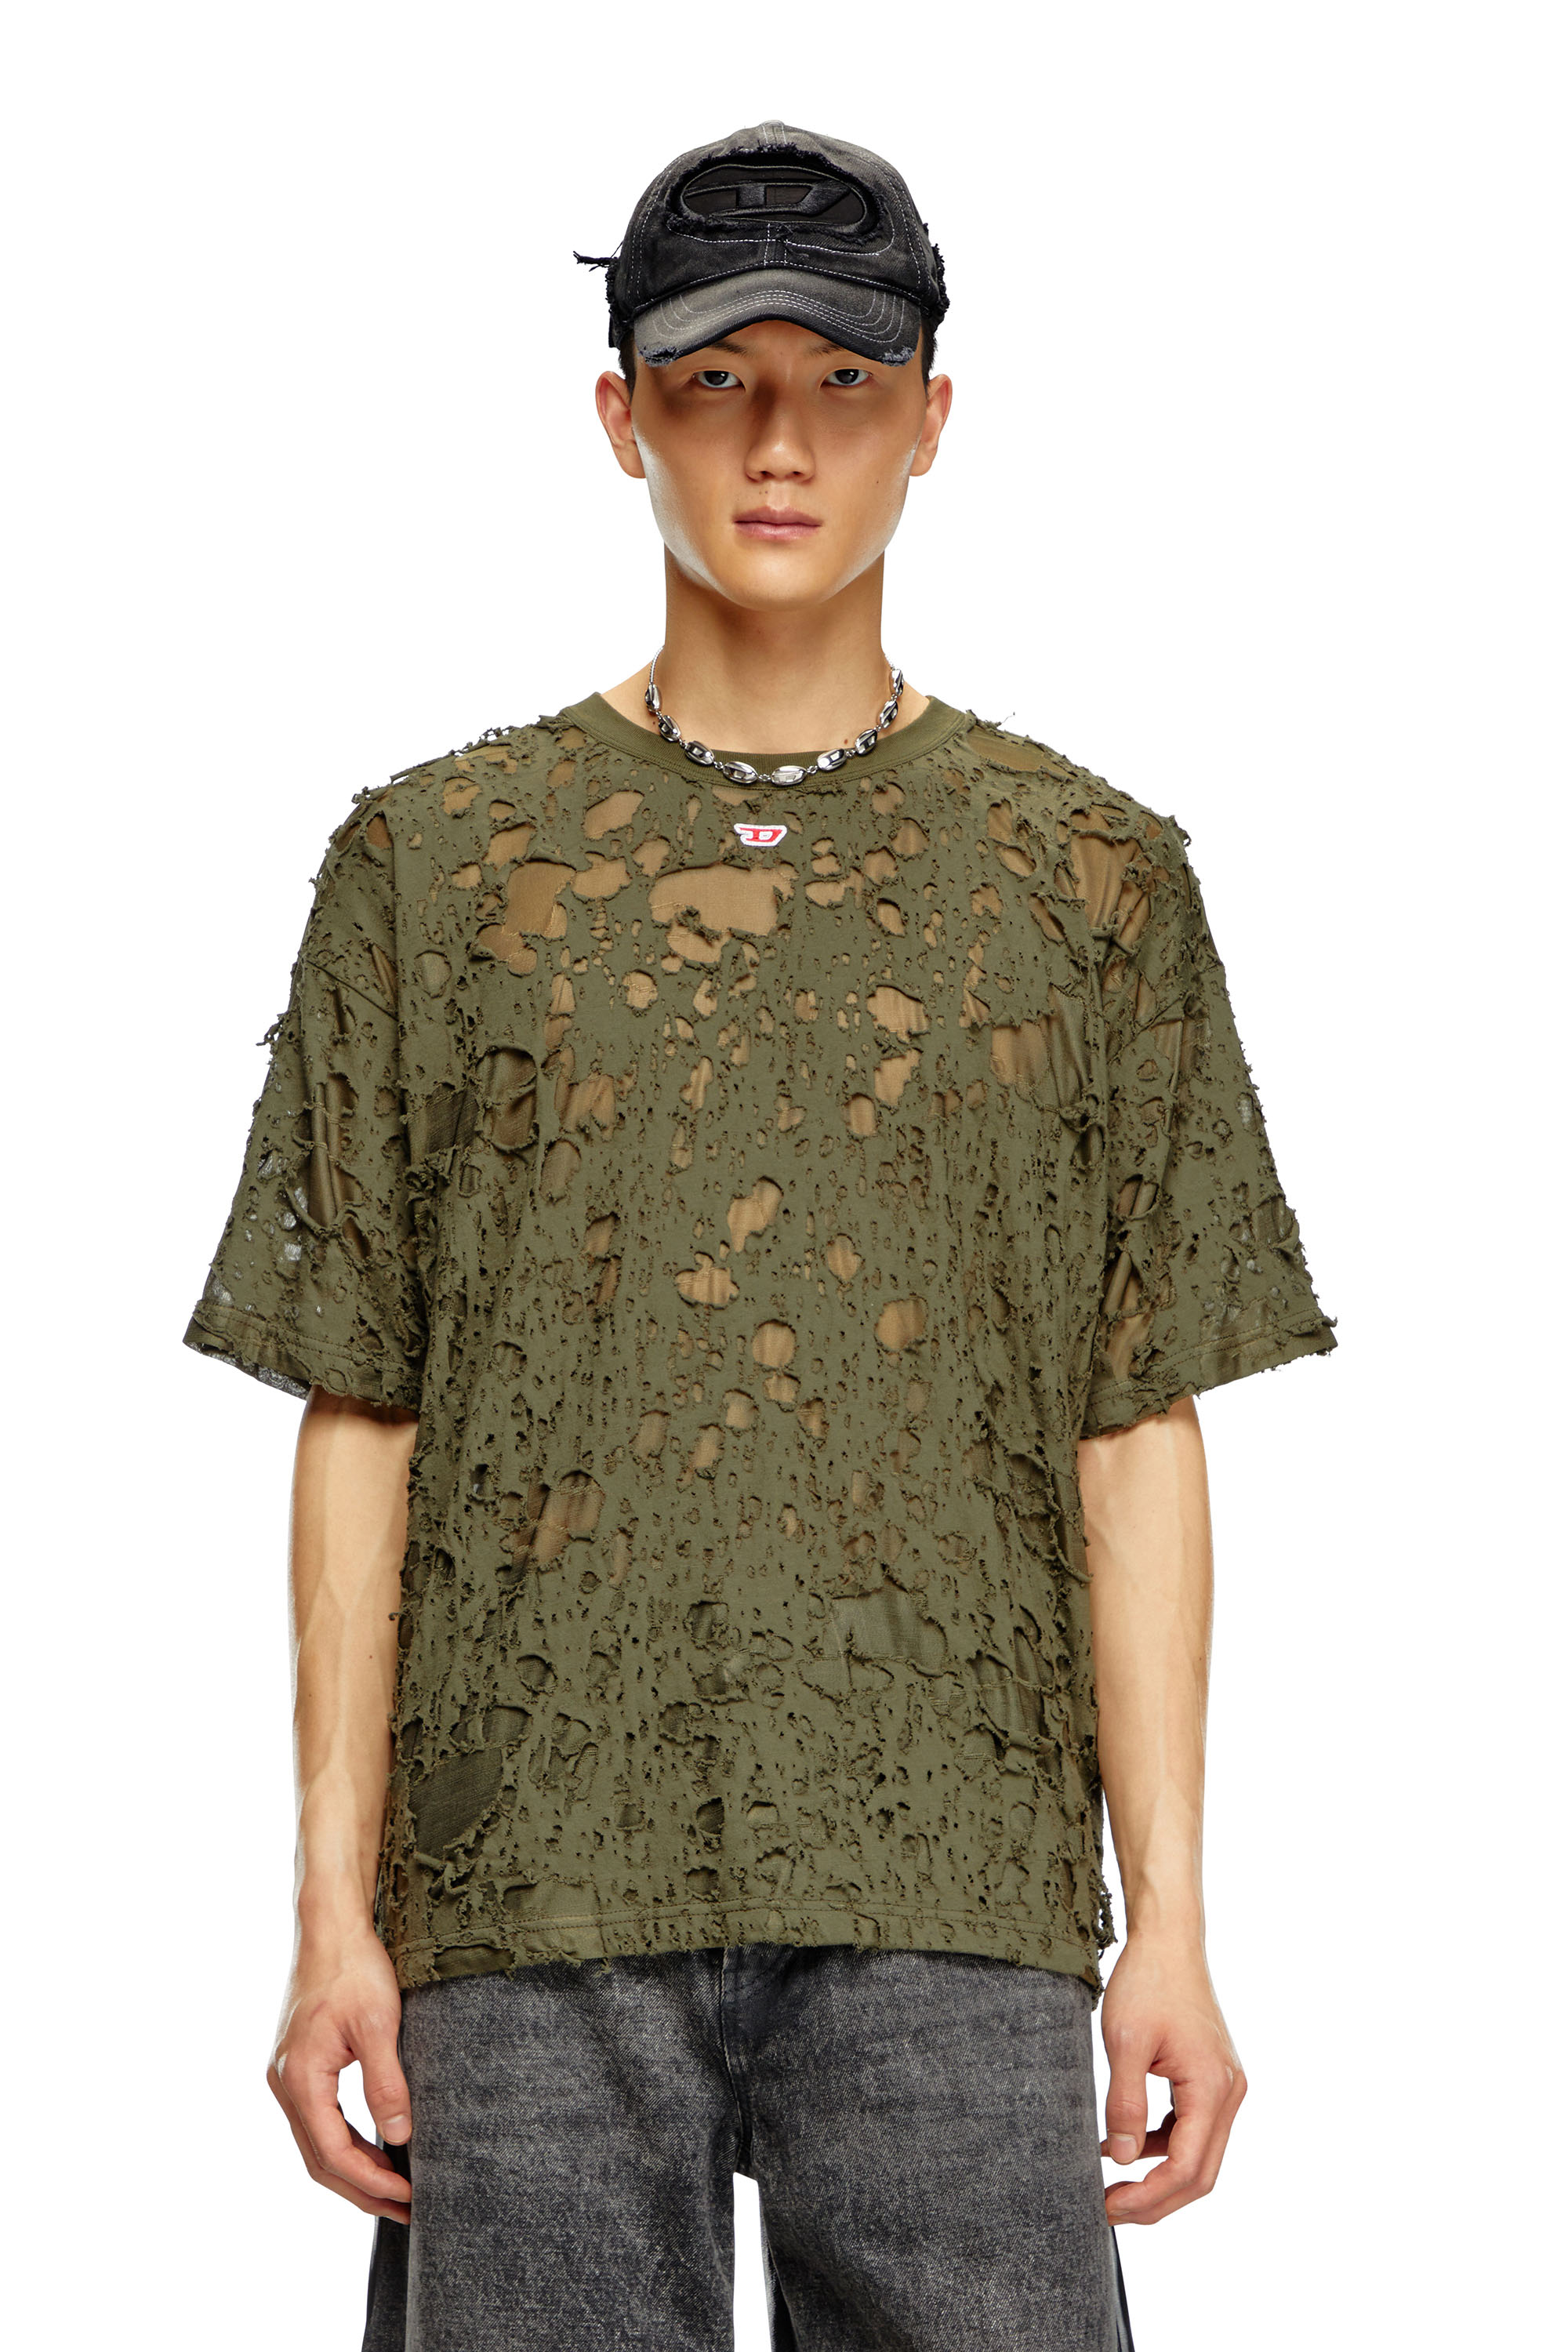 Diesel - T-BOXT-Q3, Male Layered T-shirt with burn-out finish in グリーン - Image 1